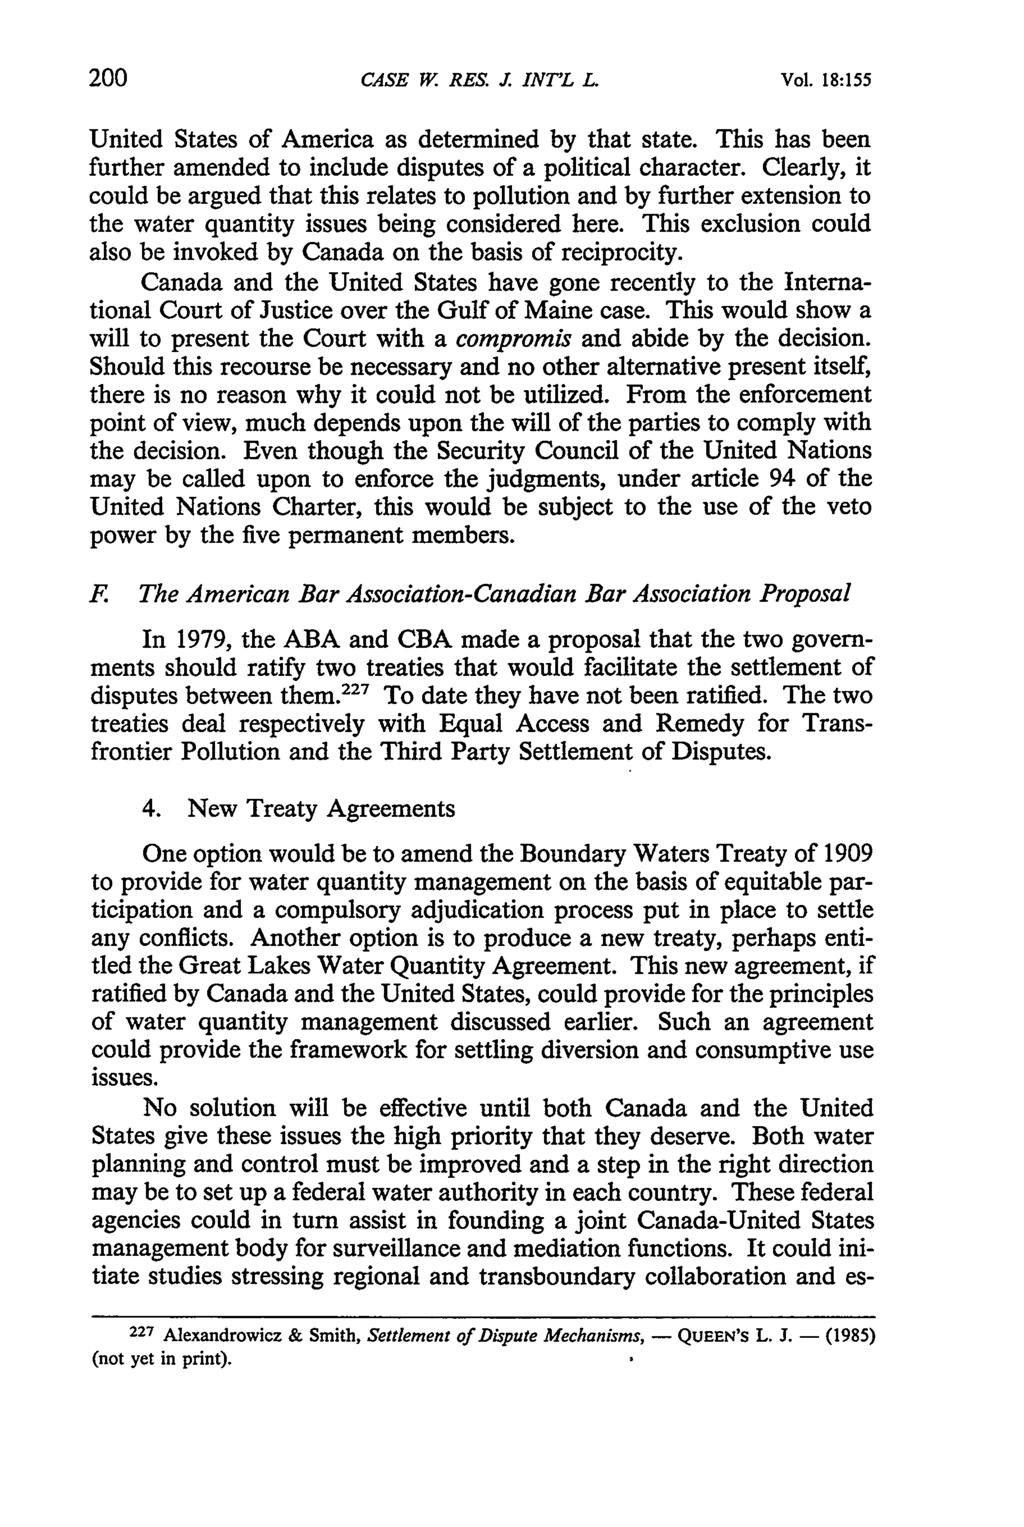 200 CASE W. RES. J. INT'L LV Vol. 18-155 United States of America as determined by that state. This has been further amended to include disputes of a political character.